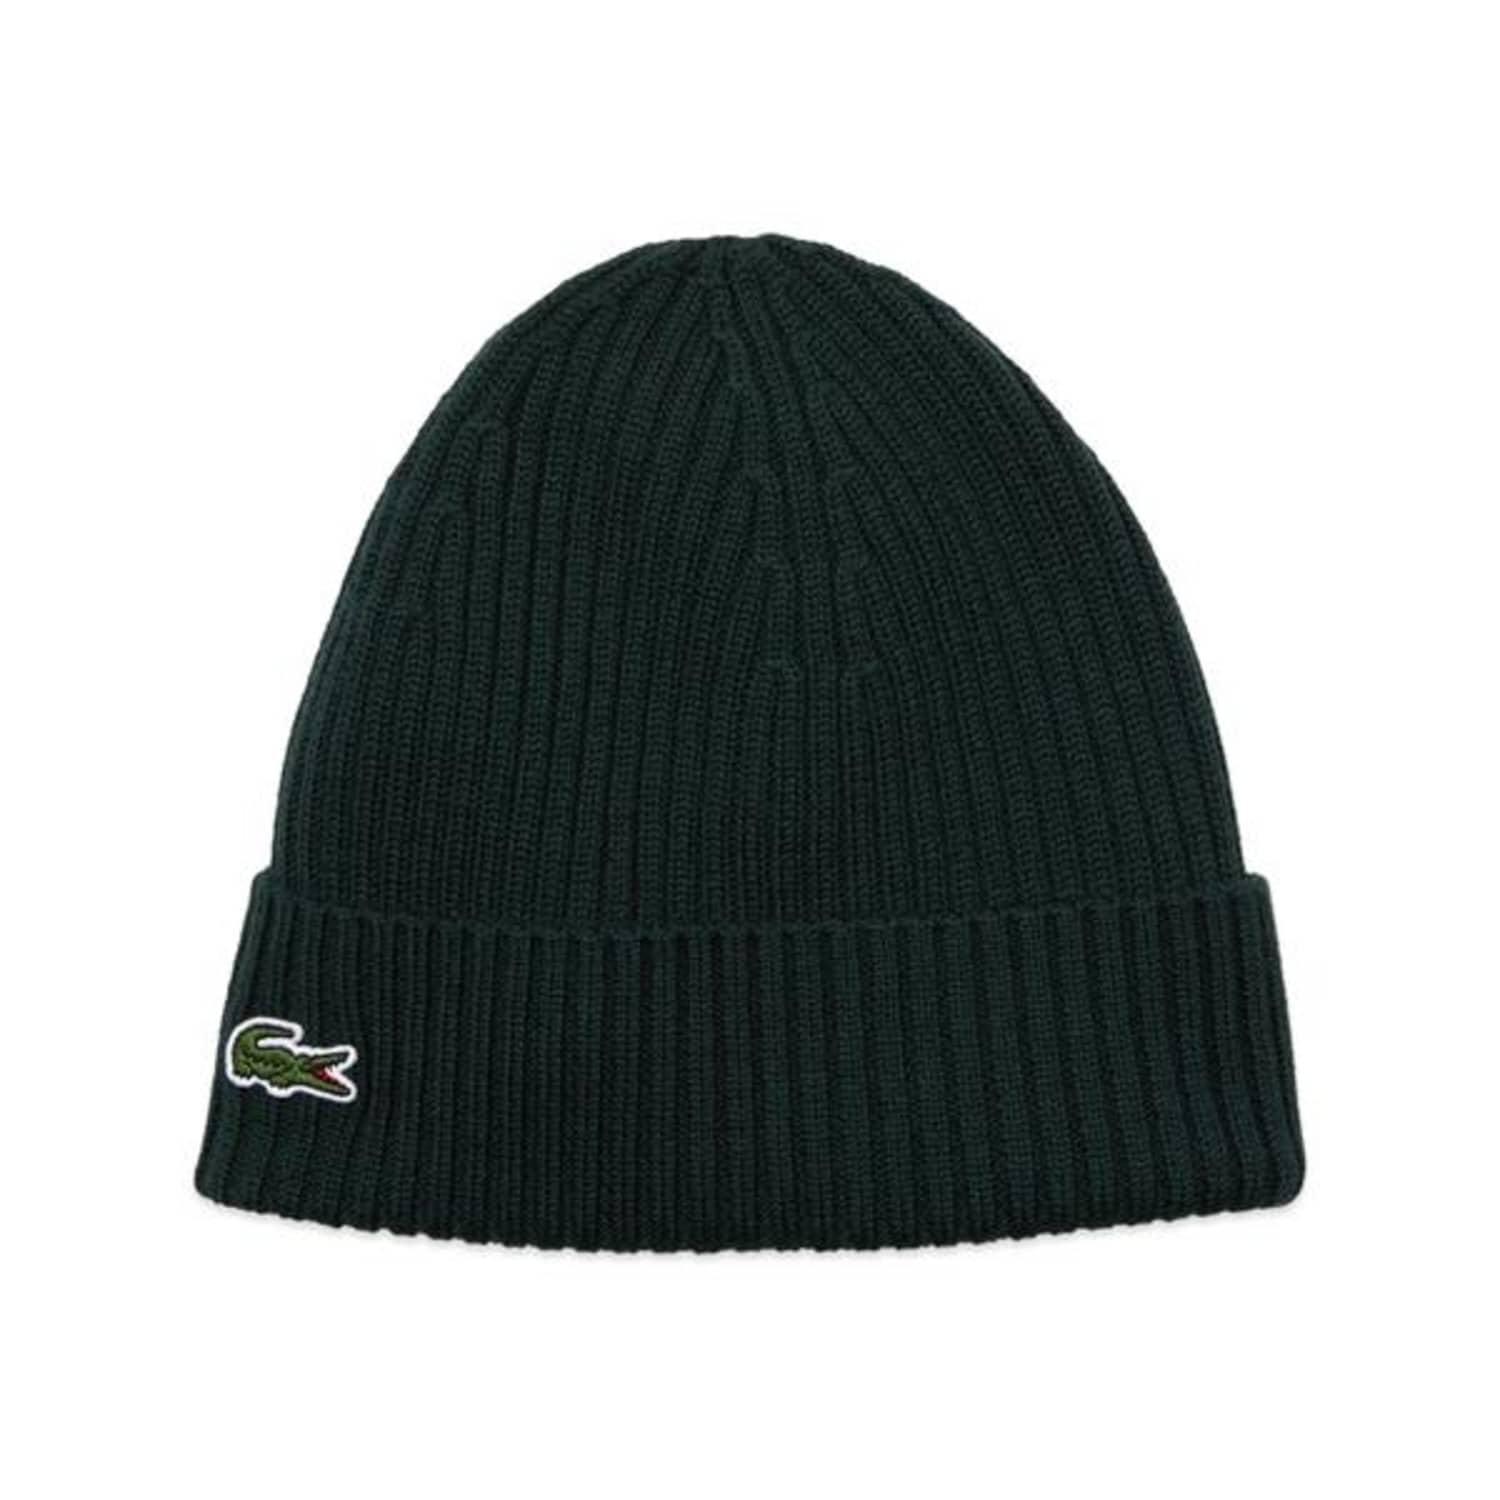 Lacoste Rb4162 Beanie Hat in Green for Men - Lyst